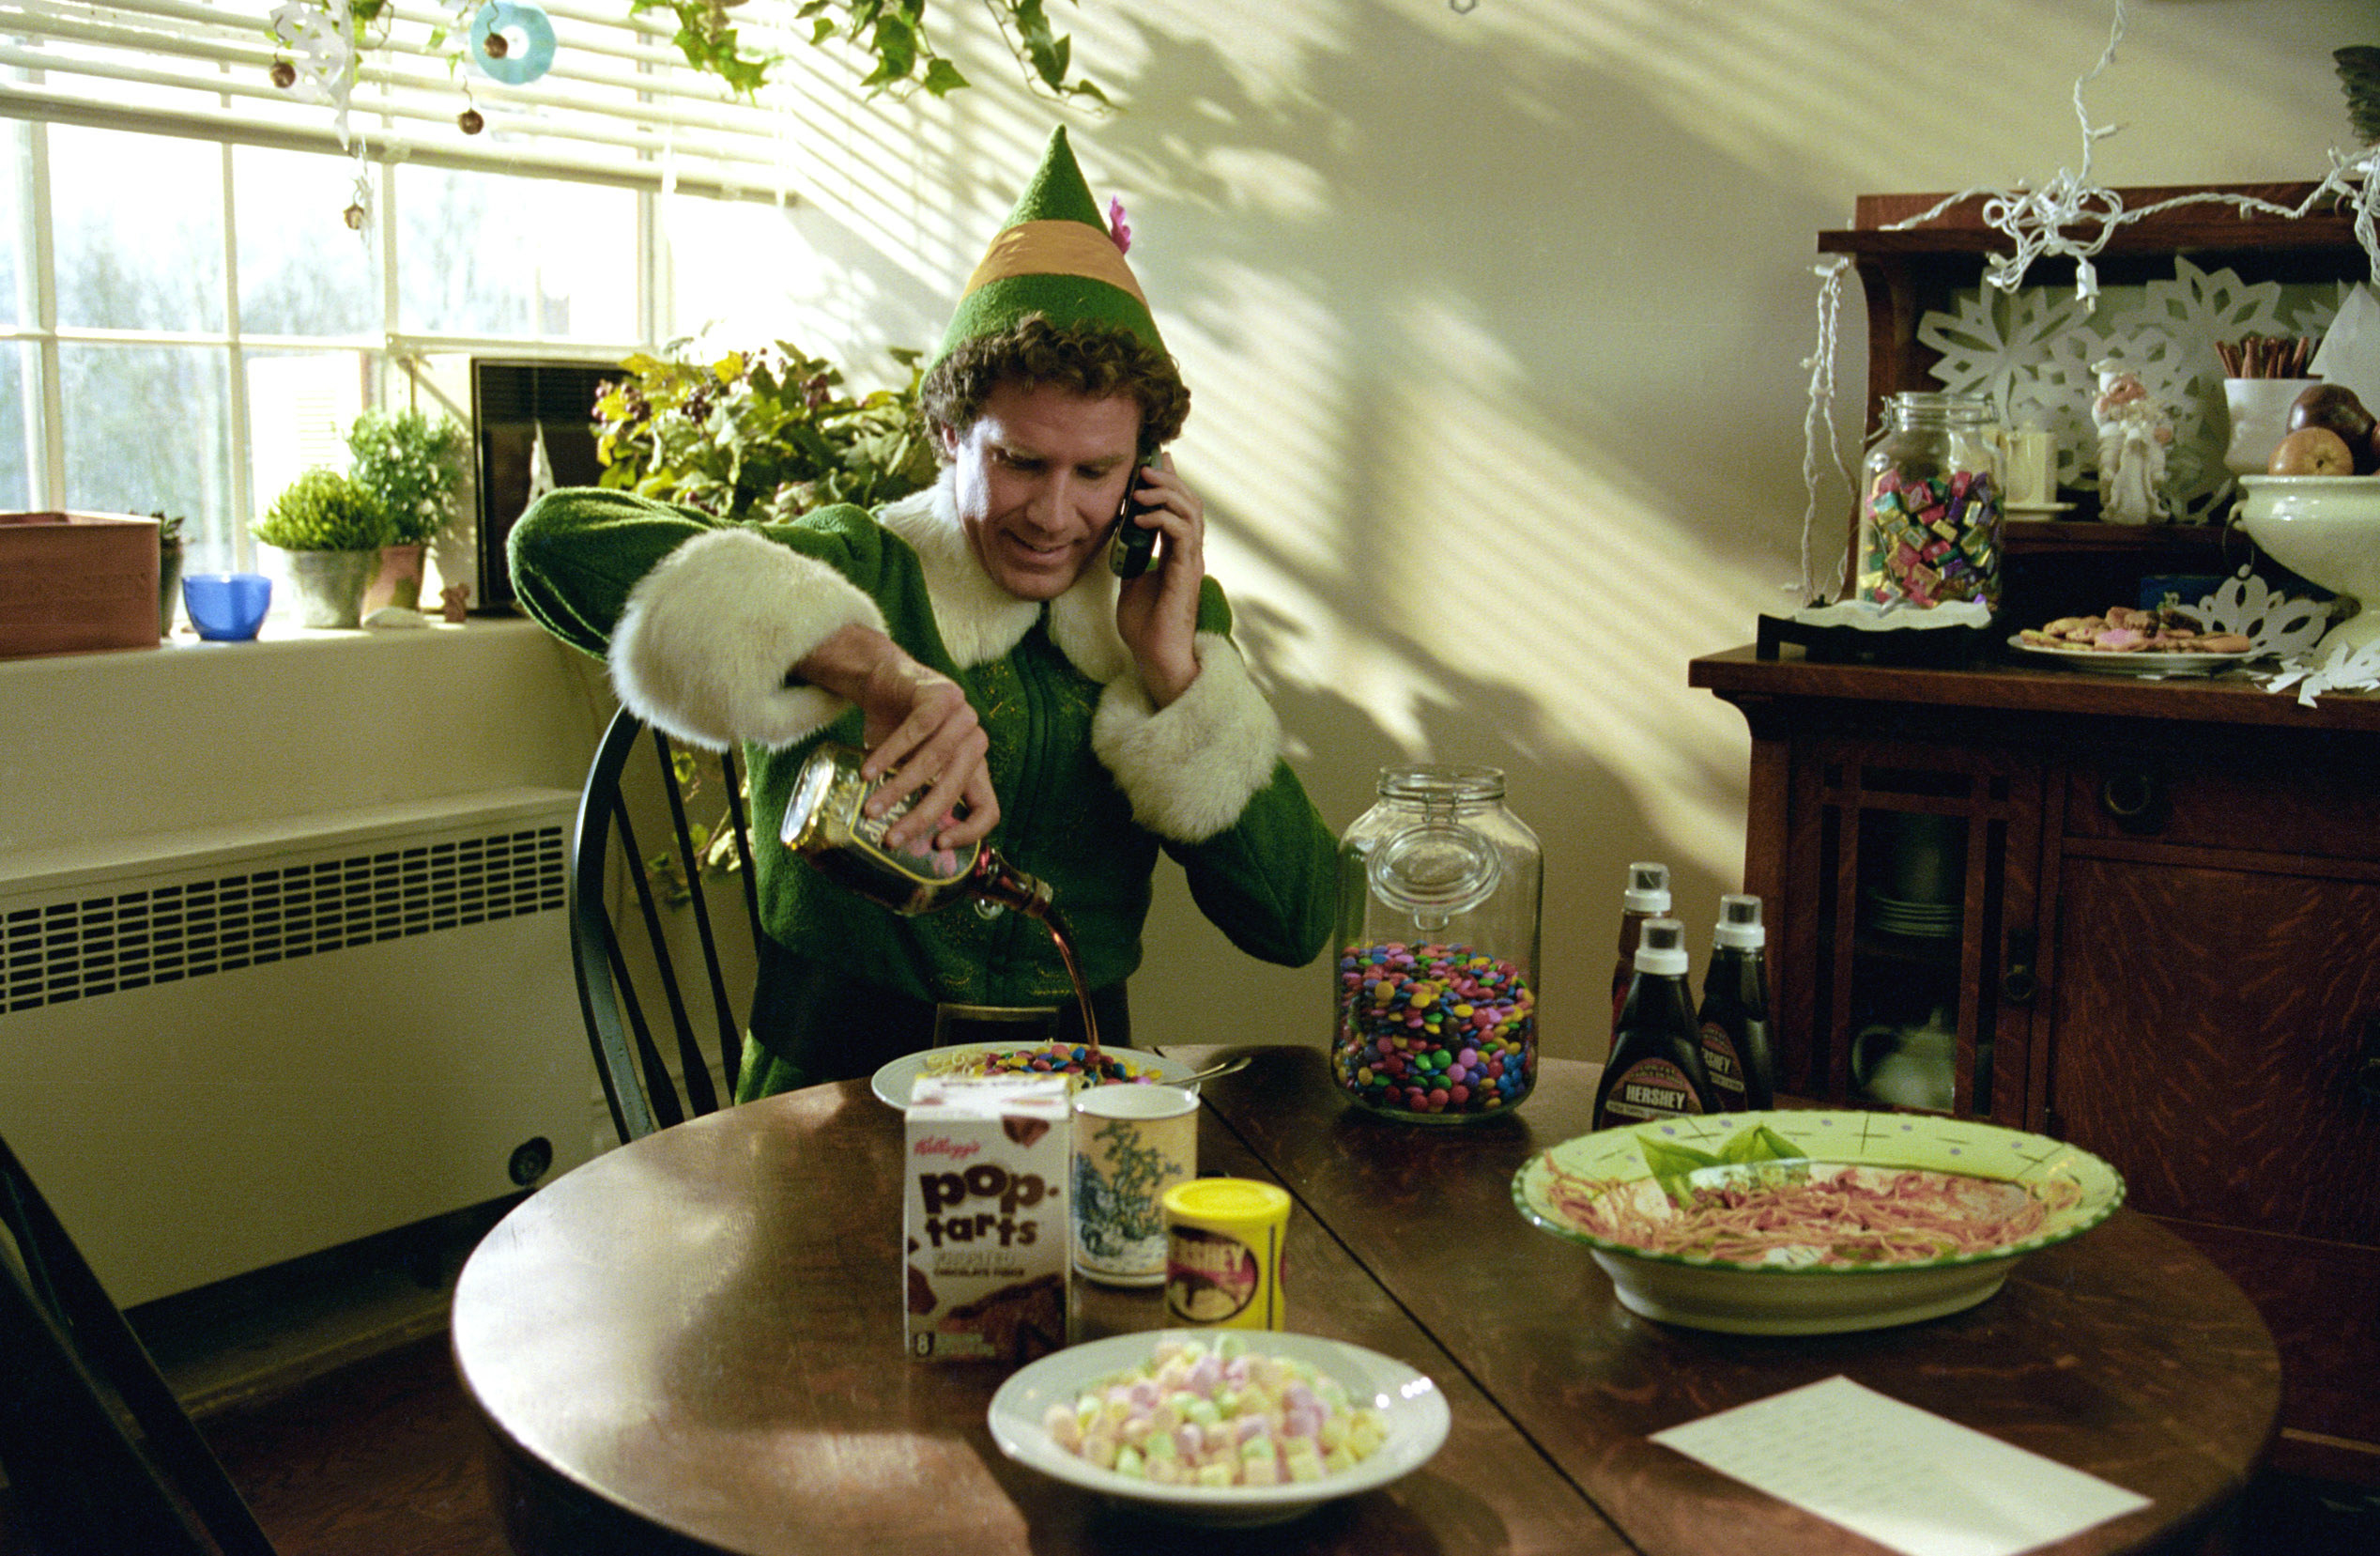 Will Ferrell as Buddy the Elf pouring chocolate syrup on his spaghetti in &quot;Elf&quot;